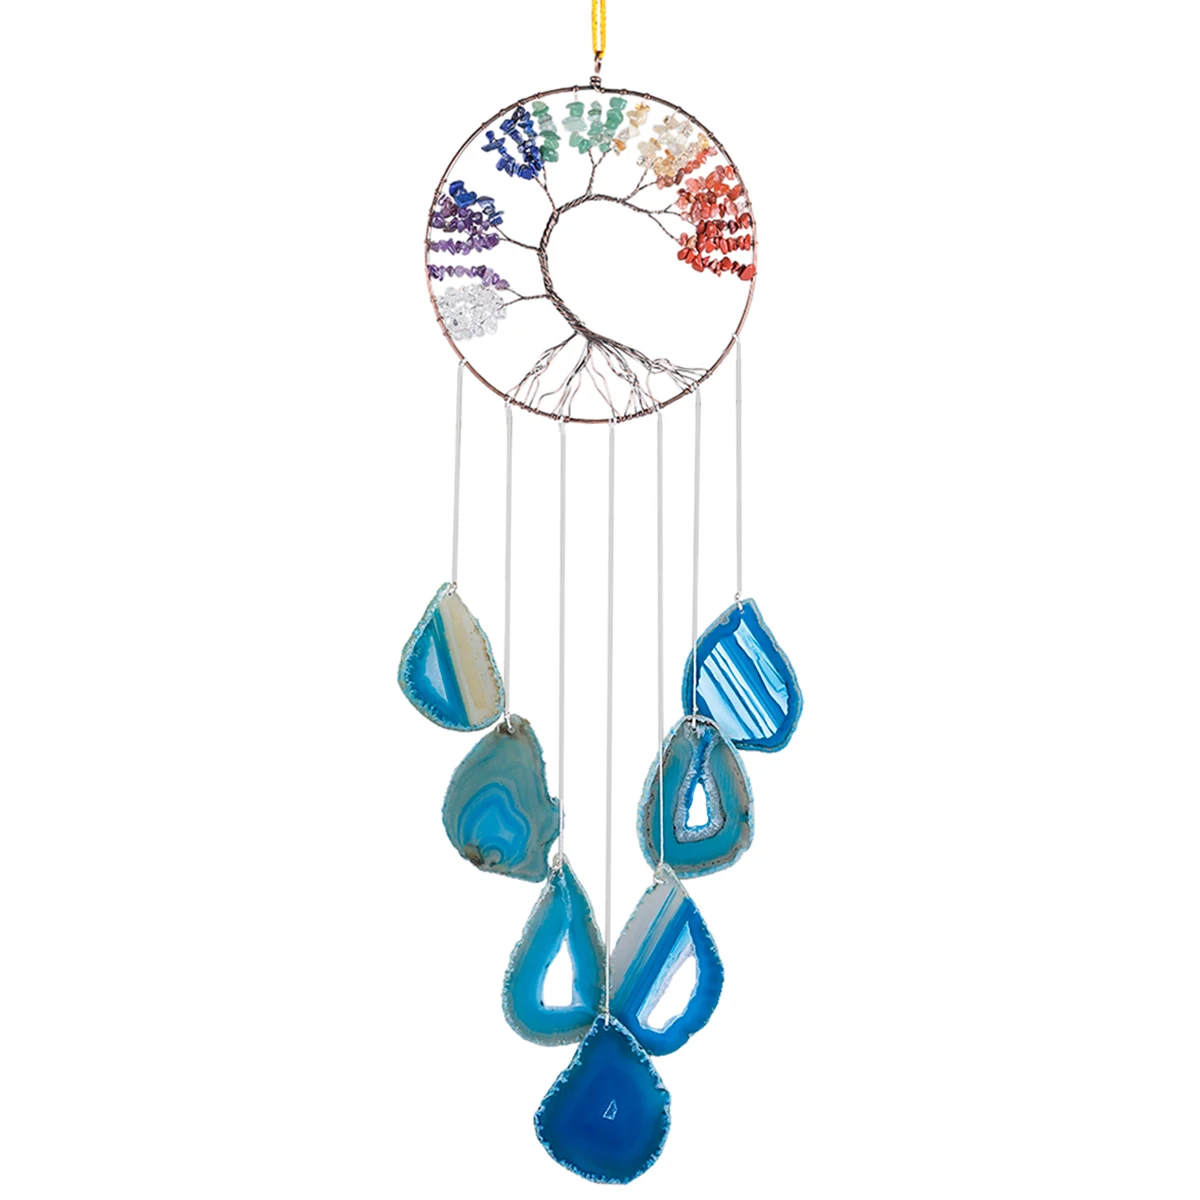 Natural Crystal Stone Wind Chime Tree Of Life 7 Chakra Healing Slices Agate Handmade Wall Hanging Ornaments Home Decoration Gift 1 pair healing lucky crystal money tree with acrylic bookends book ends for shelves desktop organizer home office